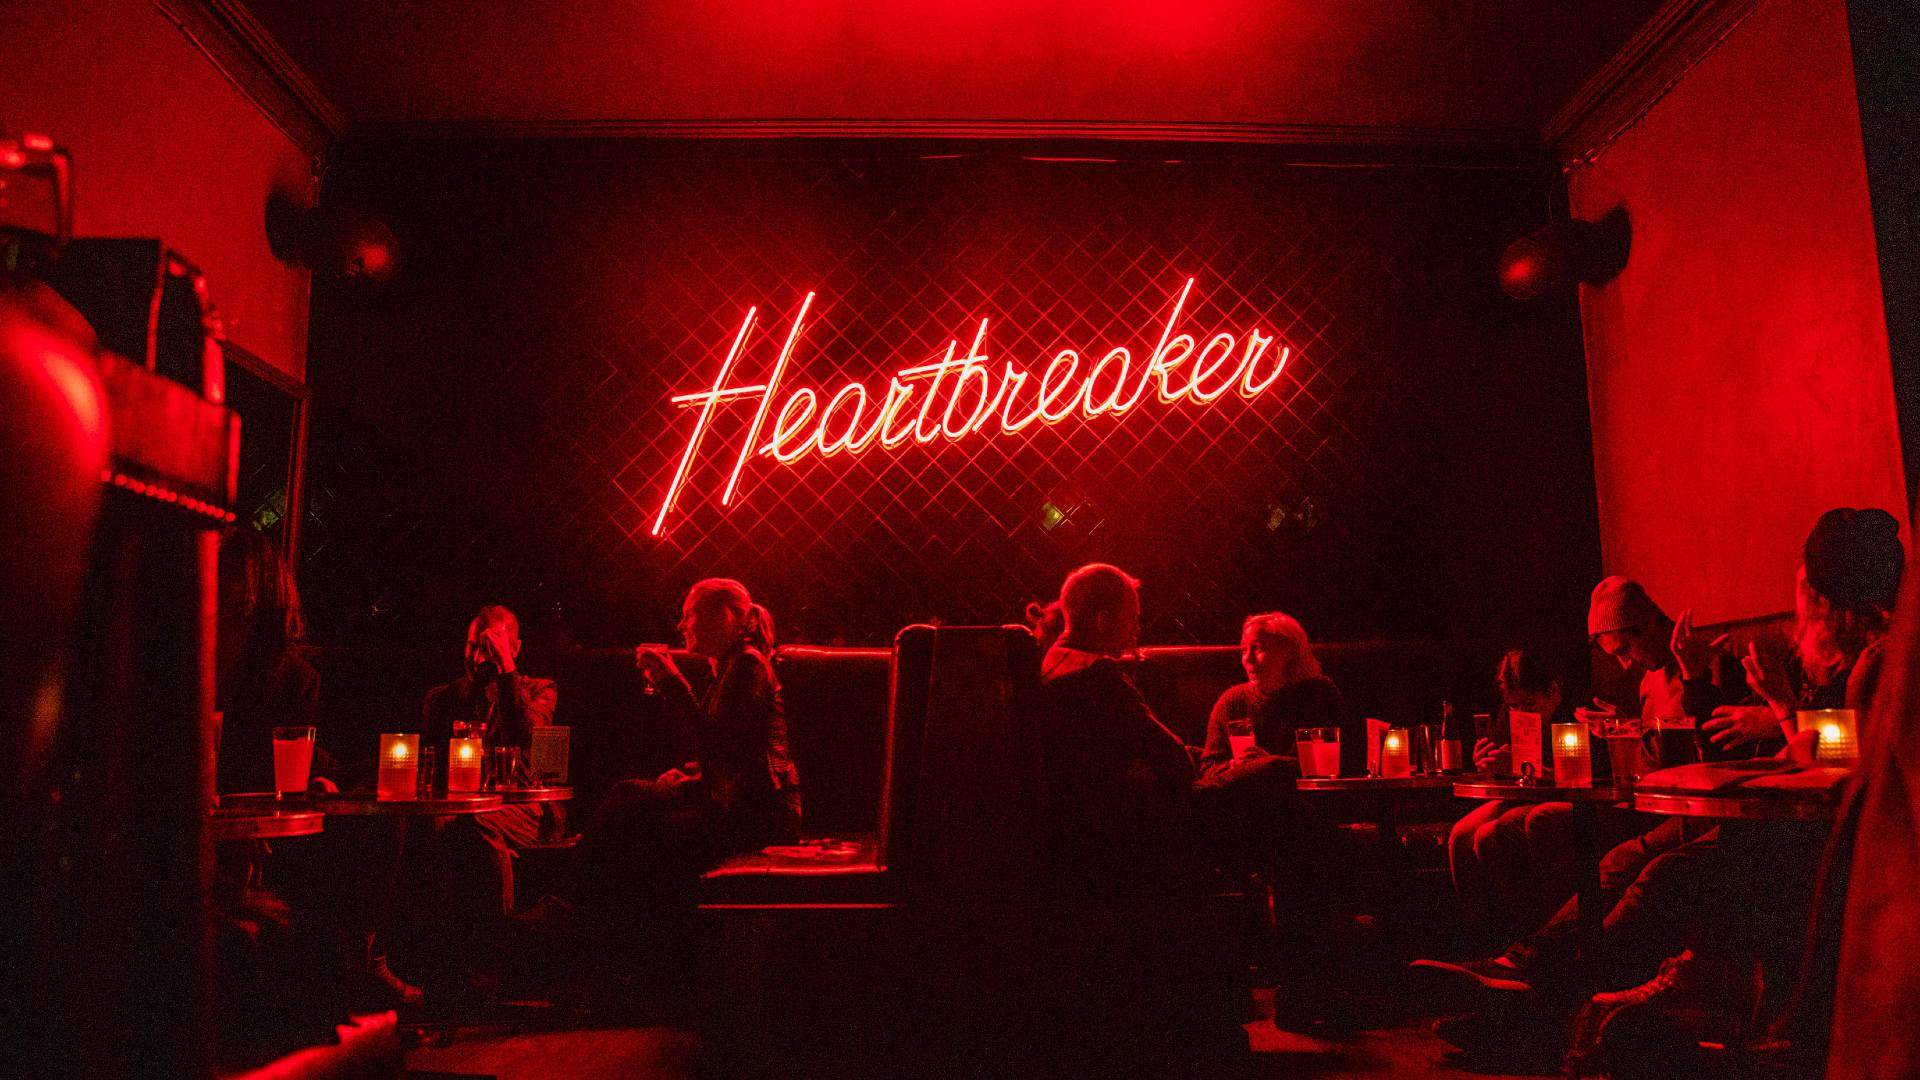 Best bar melbourne - a red neon sign heartbreaker CBD with people drinking beneath